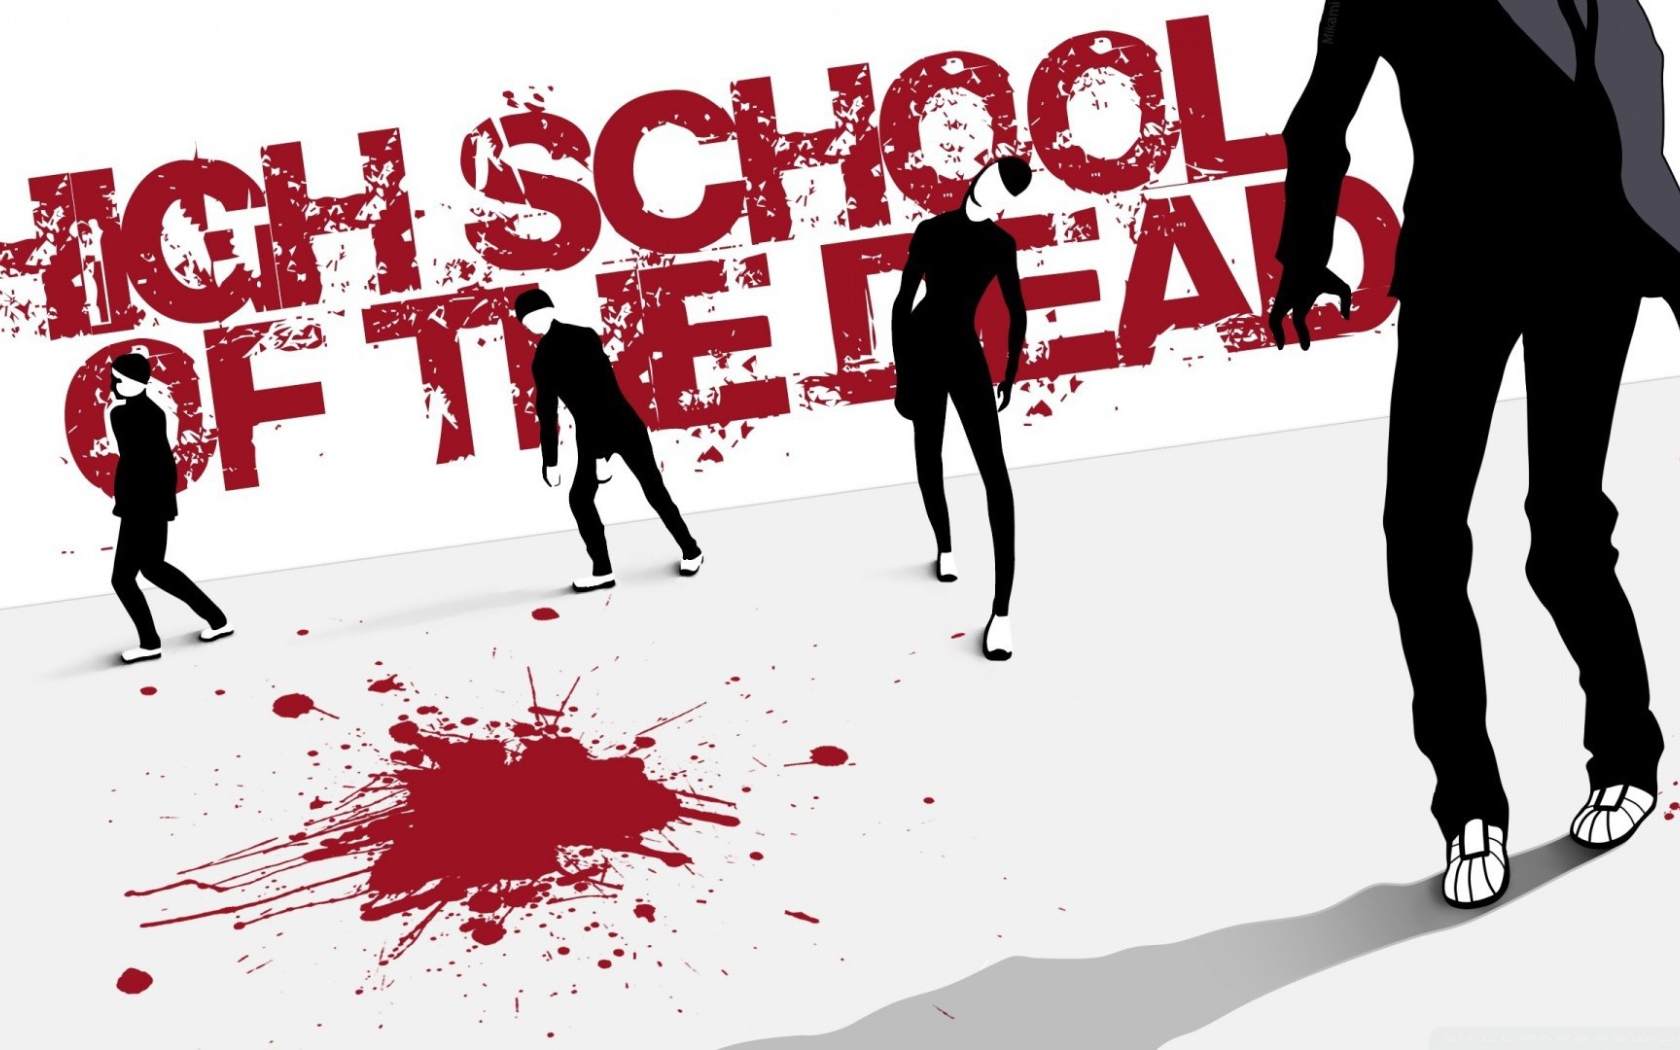 The pool of blood on the poster Anime School of the Dead